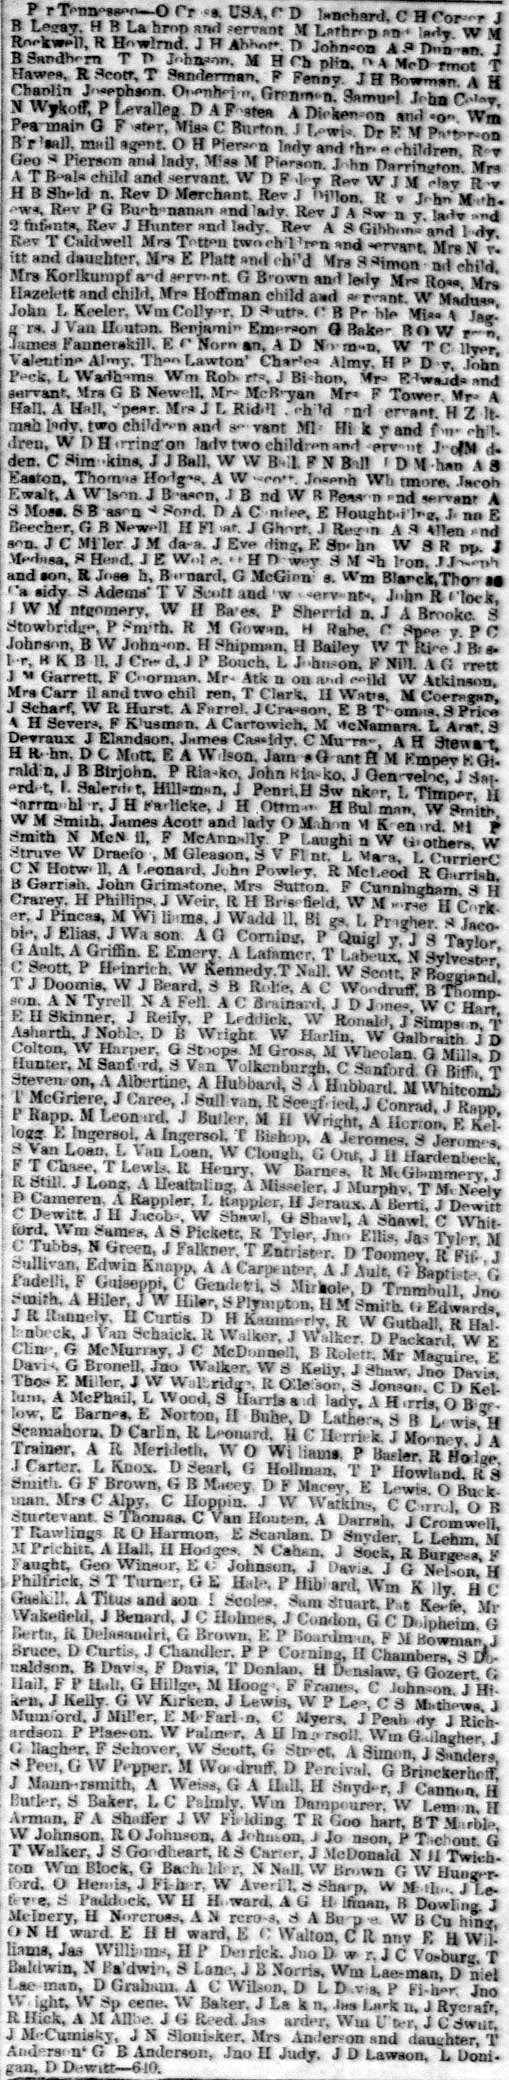 Passengers by teh SS Tennessee, May 10, 1852.